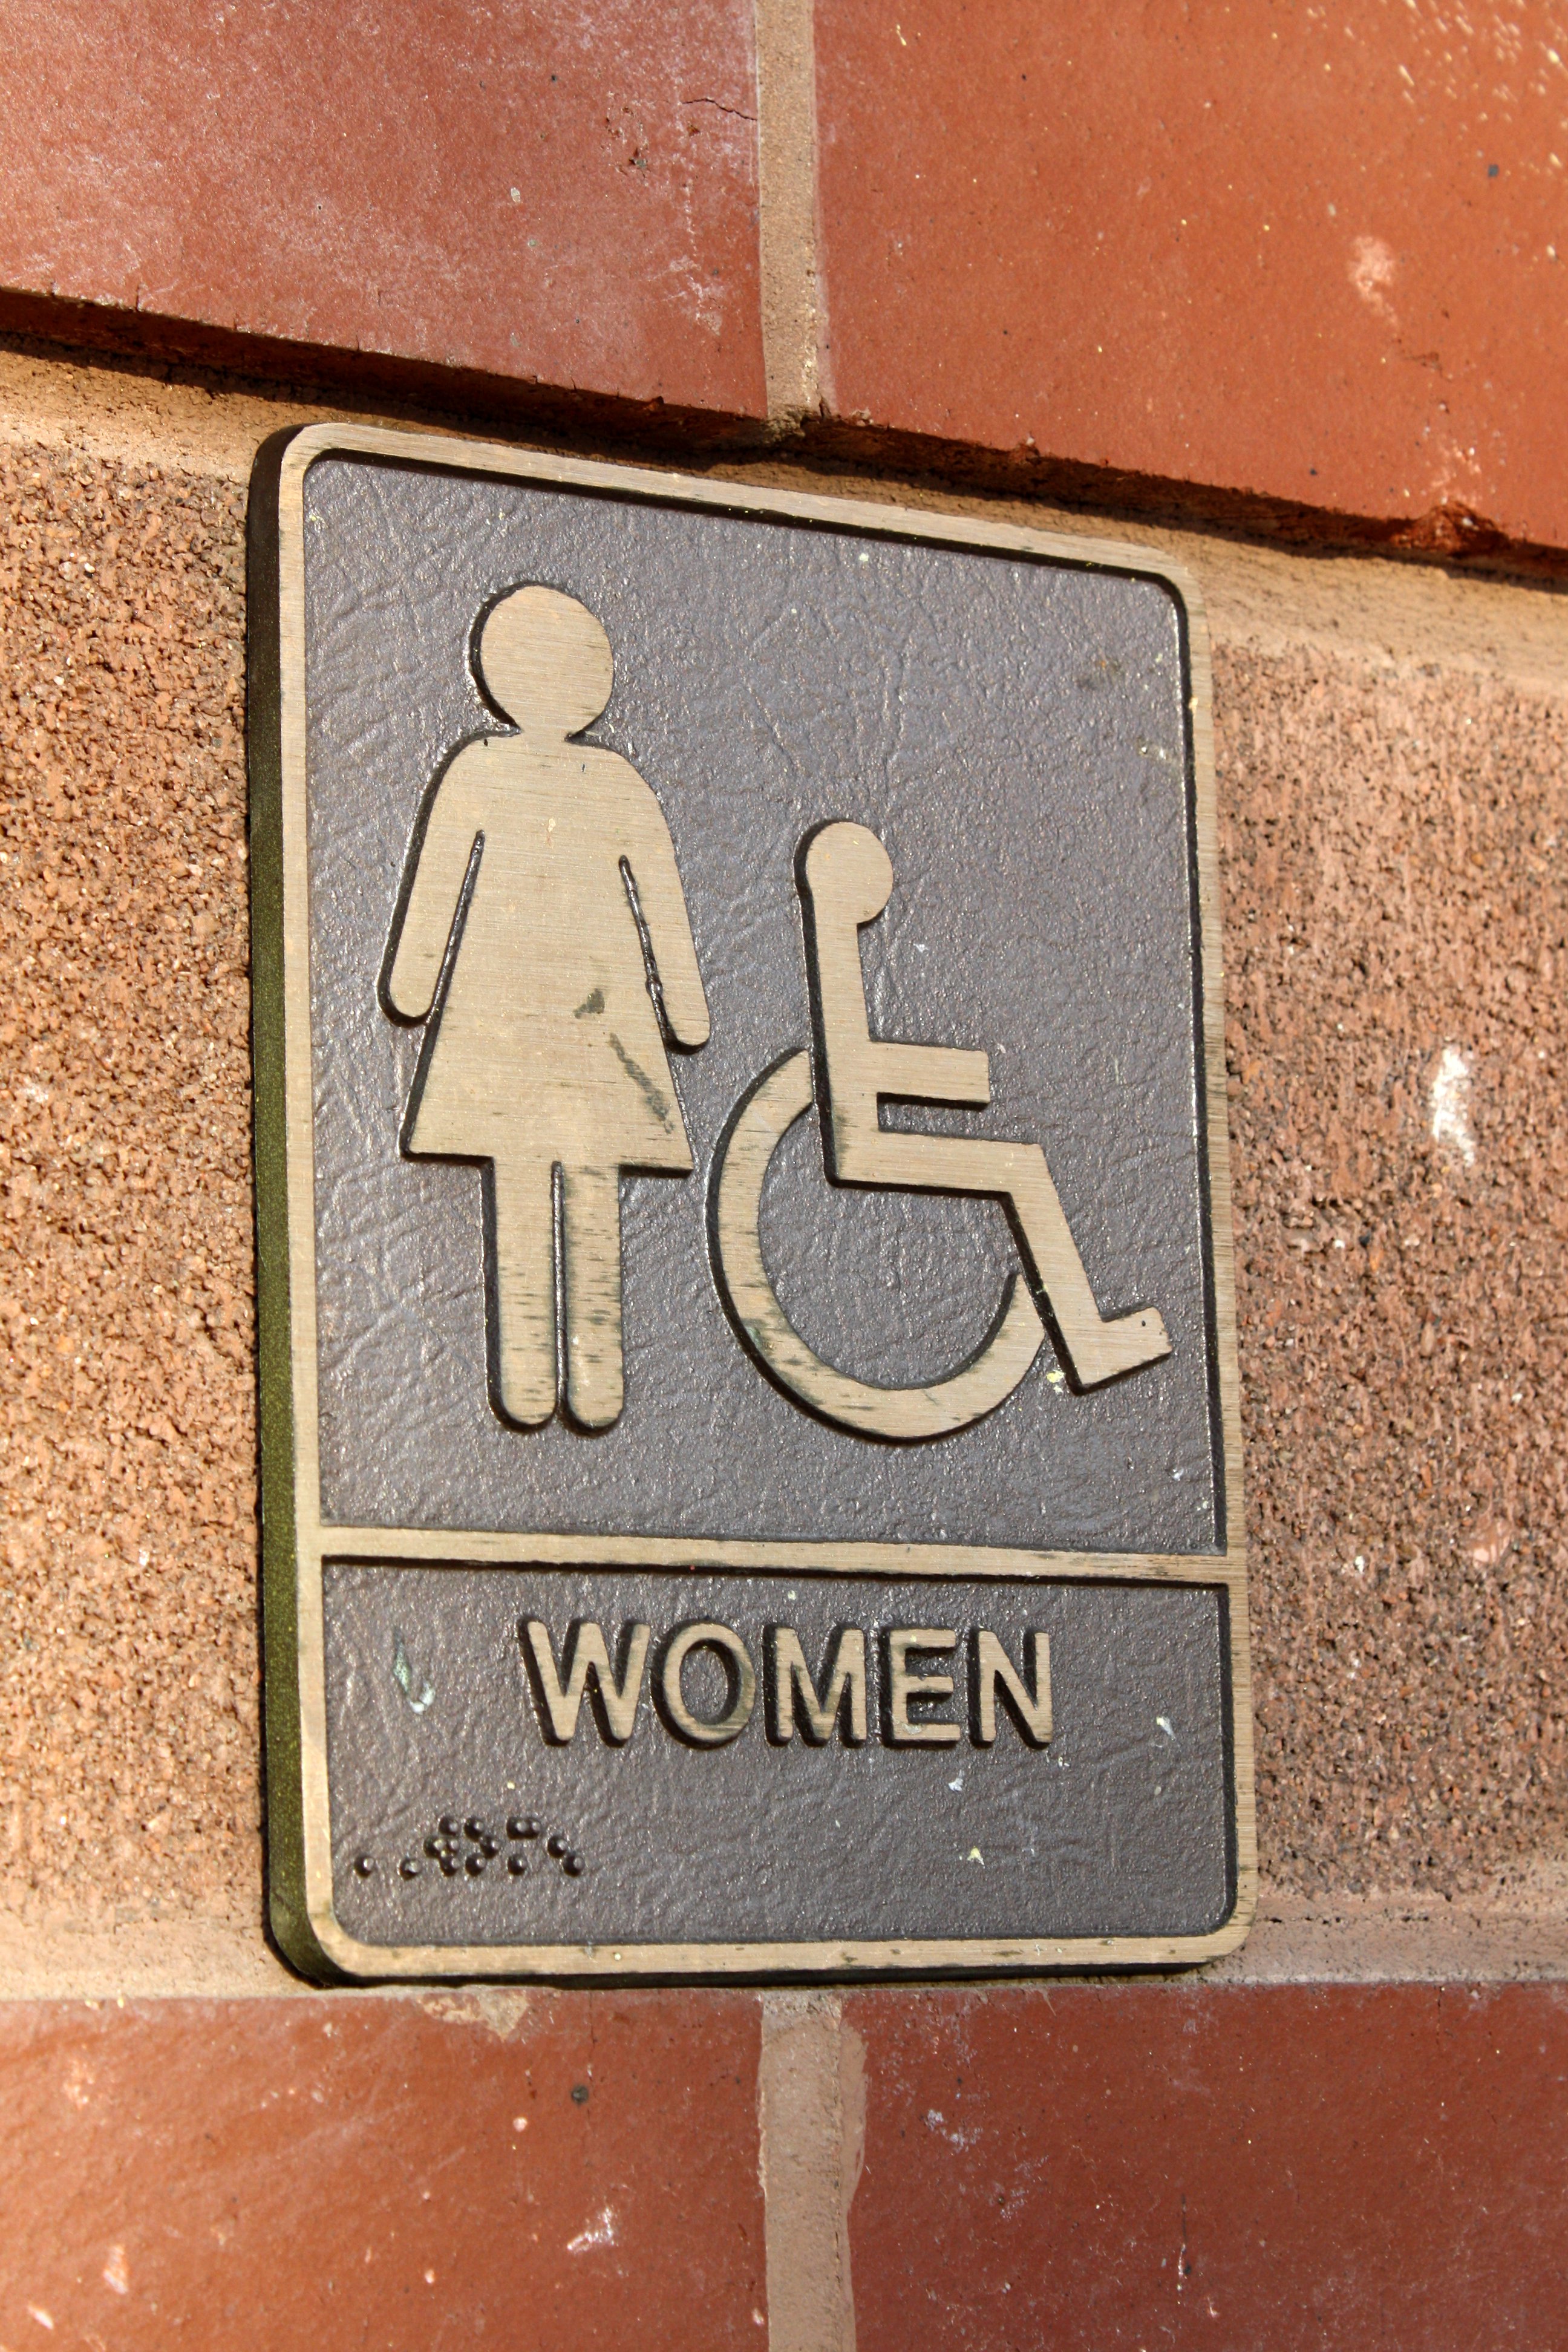 Women's Restroom Sign Brass Plaque Picture | Free Photograph | Photos